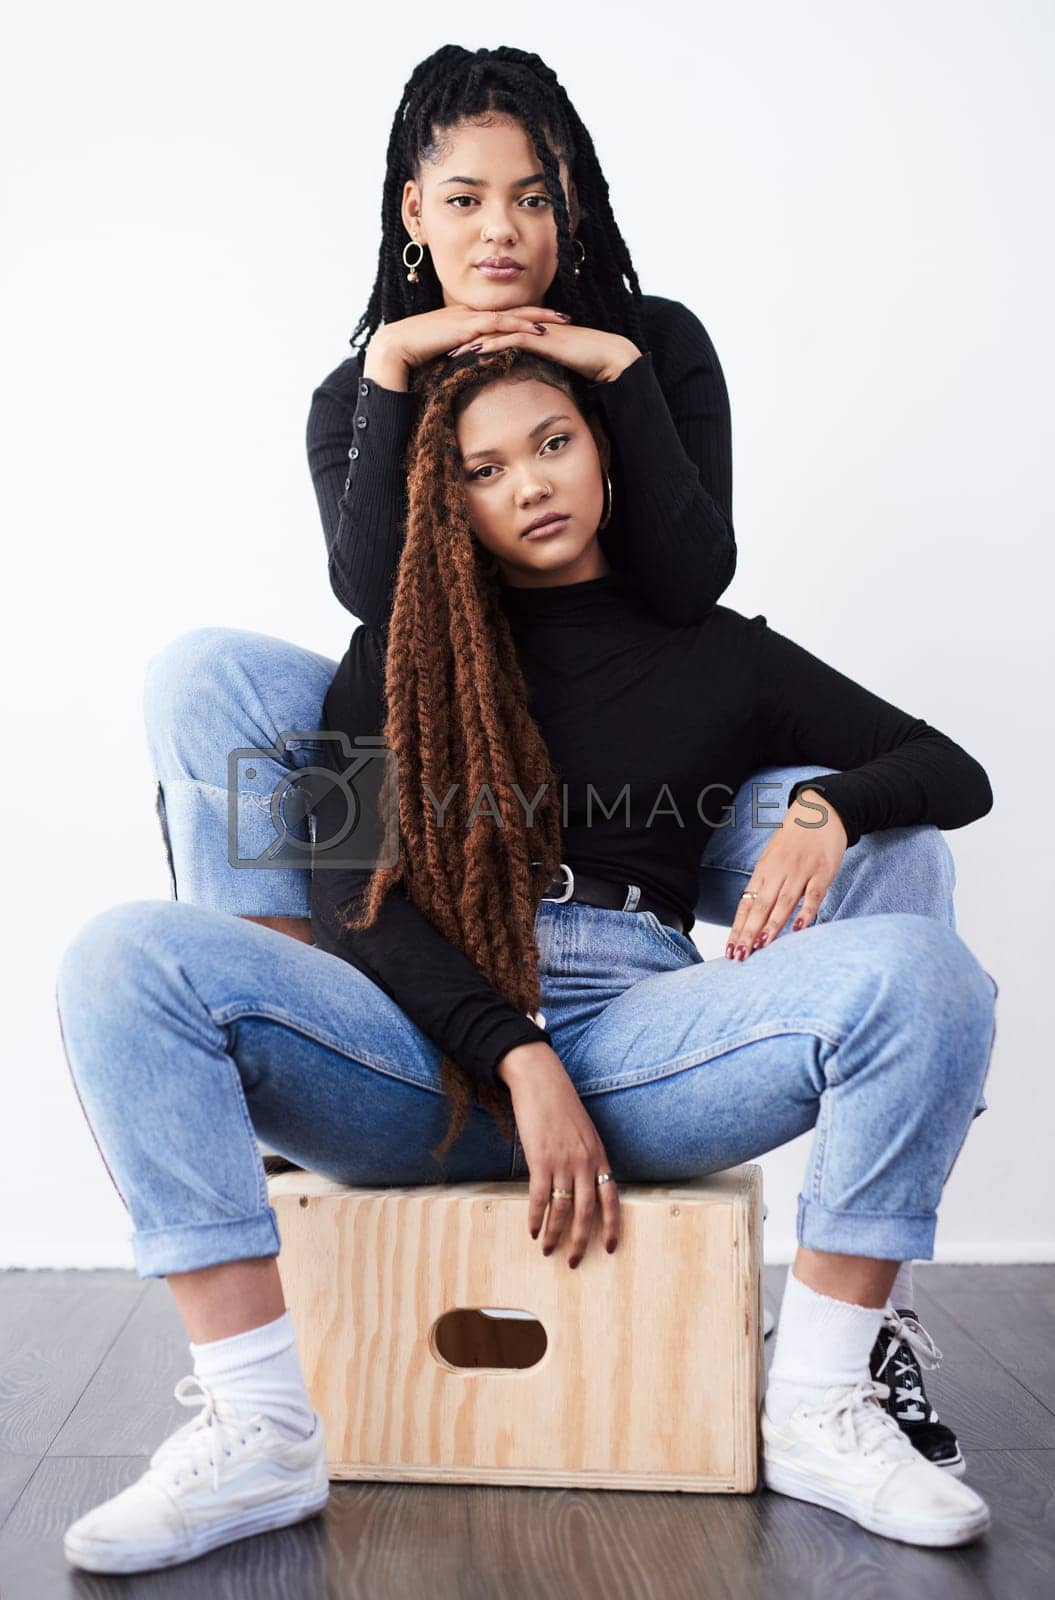 Royalty free image of They love being fashionable together. Studio shot of two beautiful young women posing against a grey background. by YuriArcurs